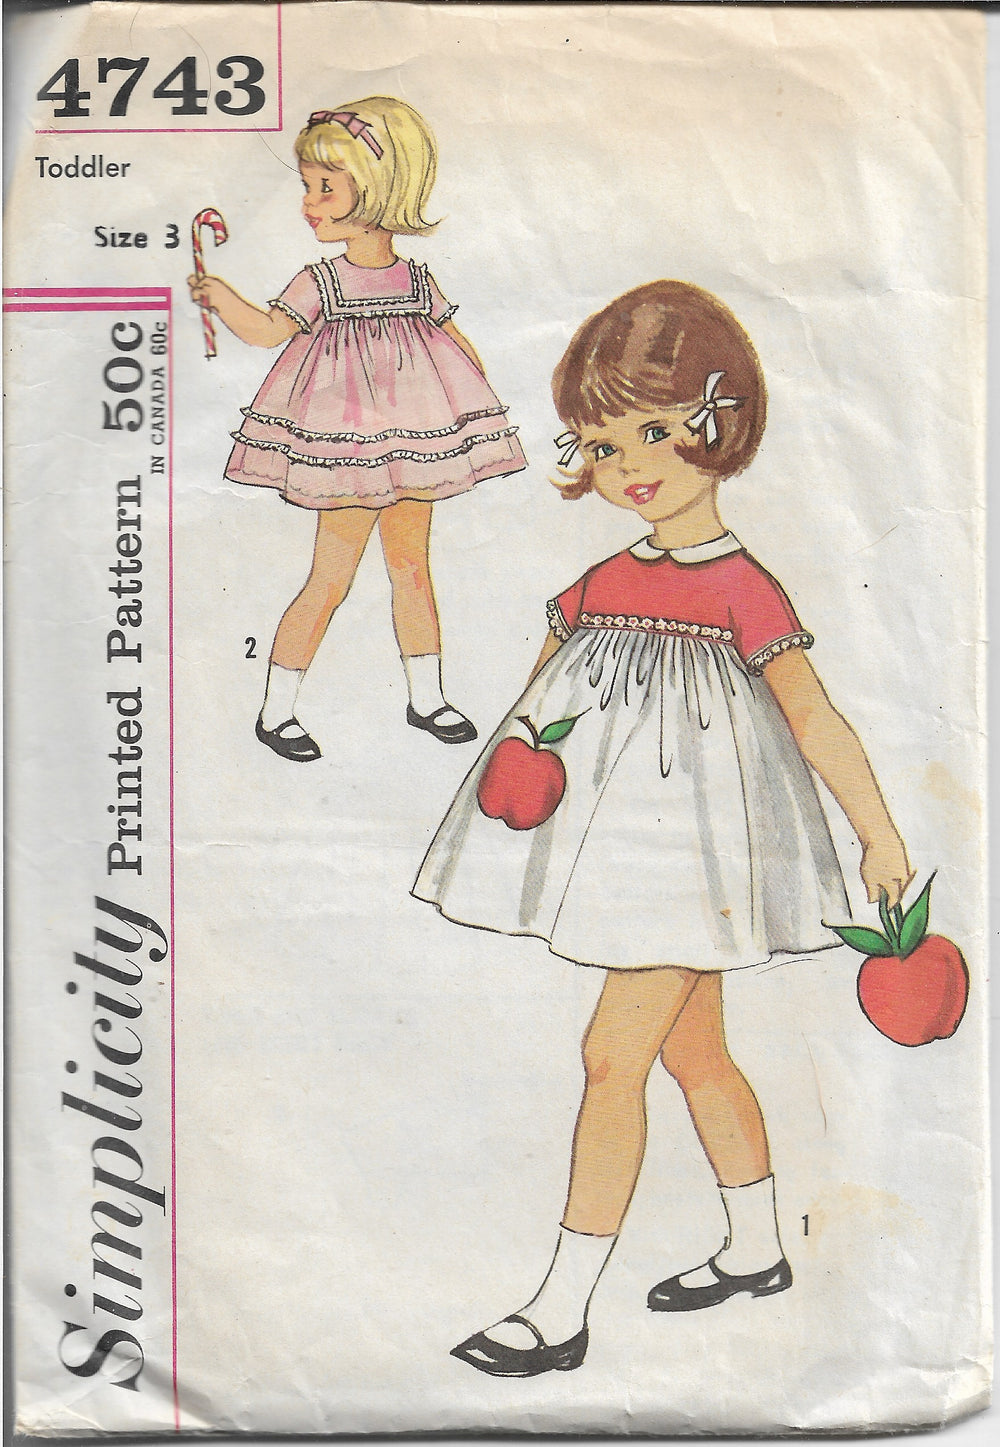 Simplicity 4743 Toddlers' One-Piece Dress Vintage Sewing Pattern 1960s' - VintageStitching - Vintage Sewing Patterns